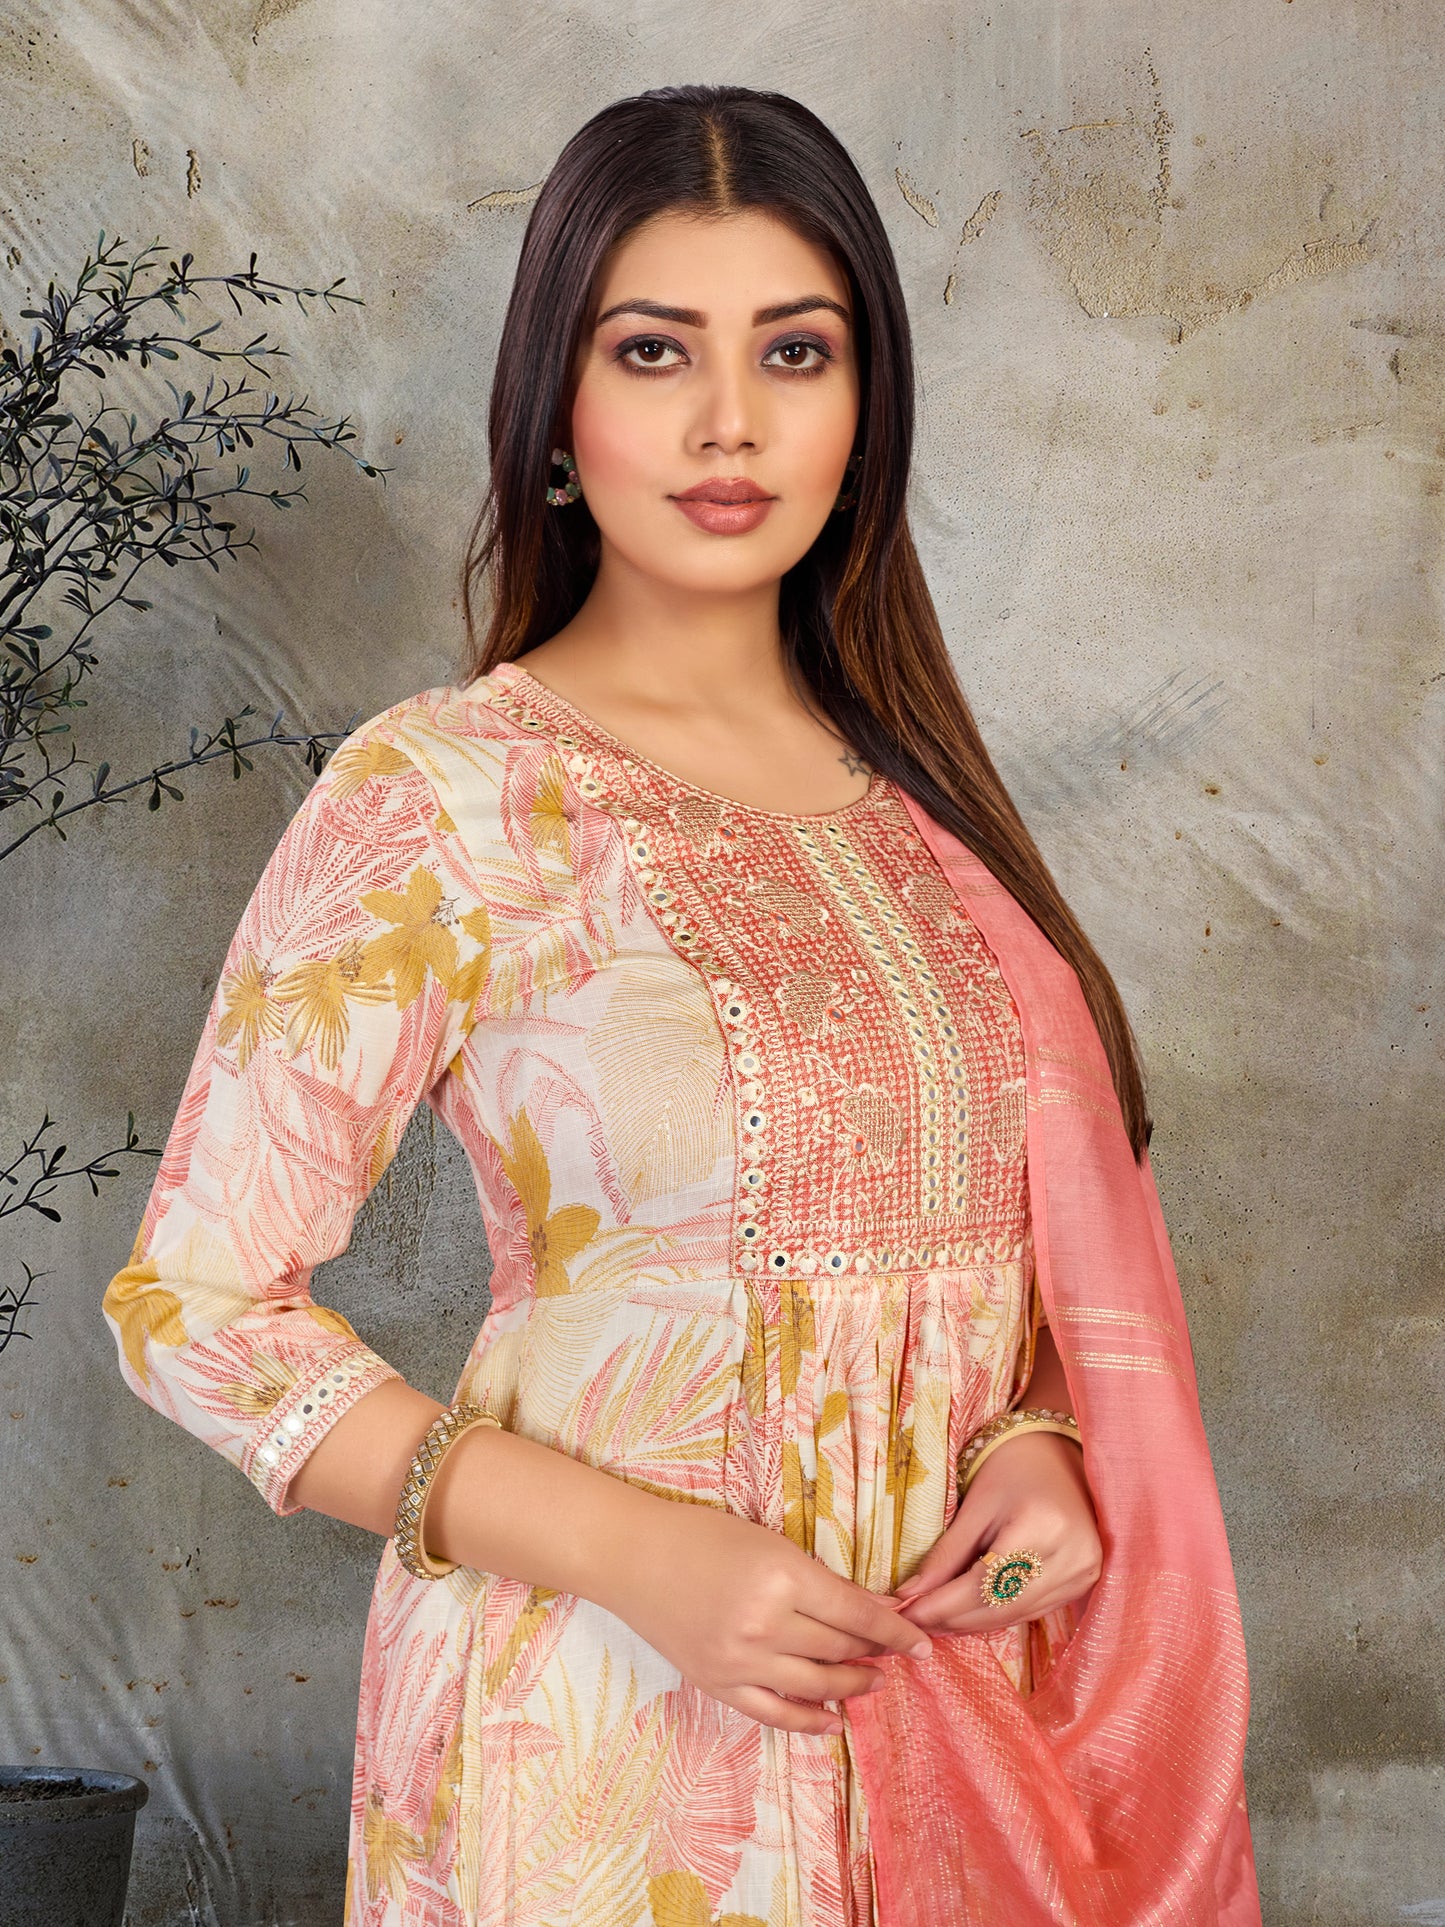 Anarakli Women Kurta With Pant &amp; Dupatta set So Beautiful Embroidery Work Perfect Fit And Party &nbsp;&amp; Casual Wear